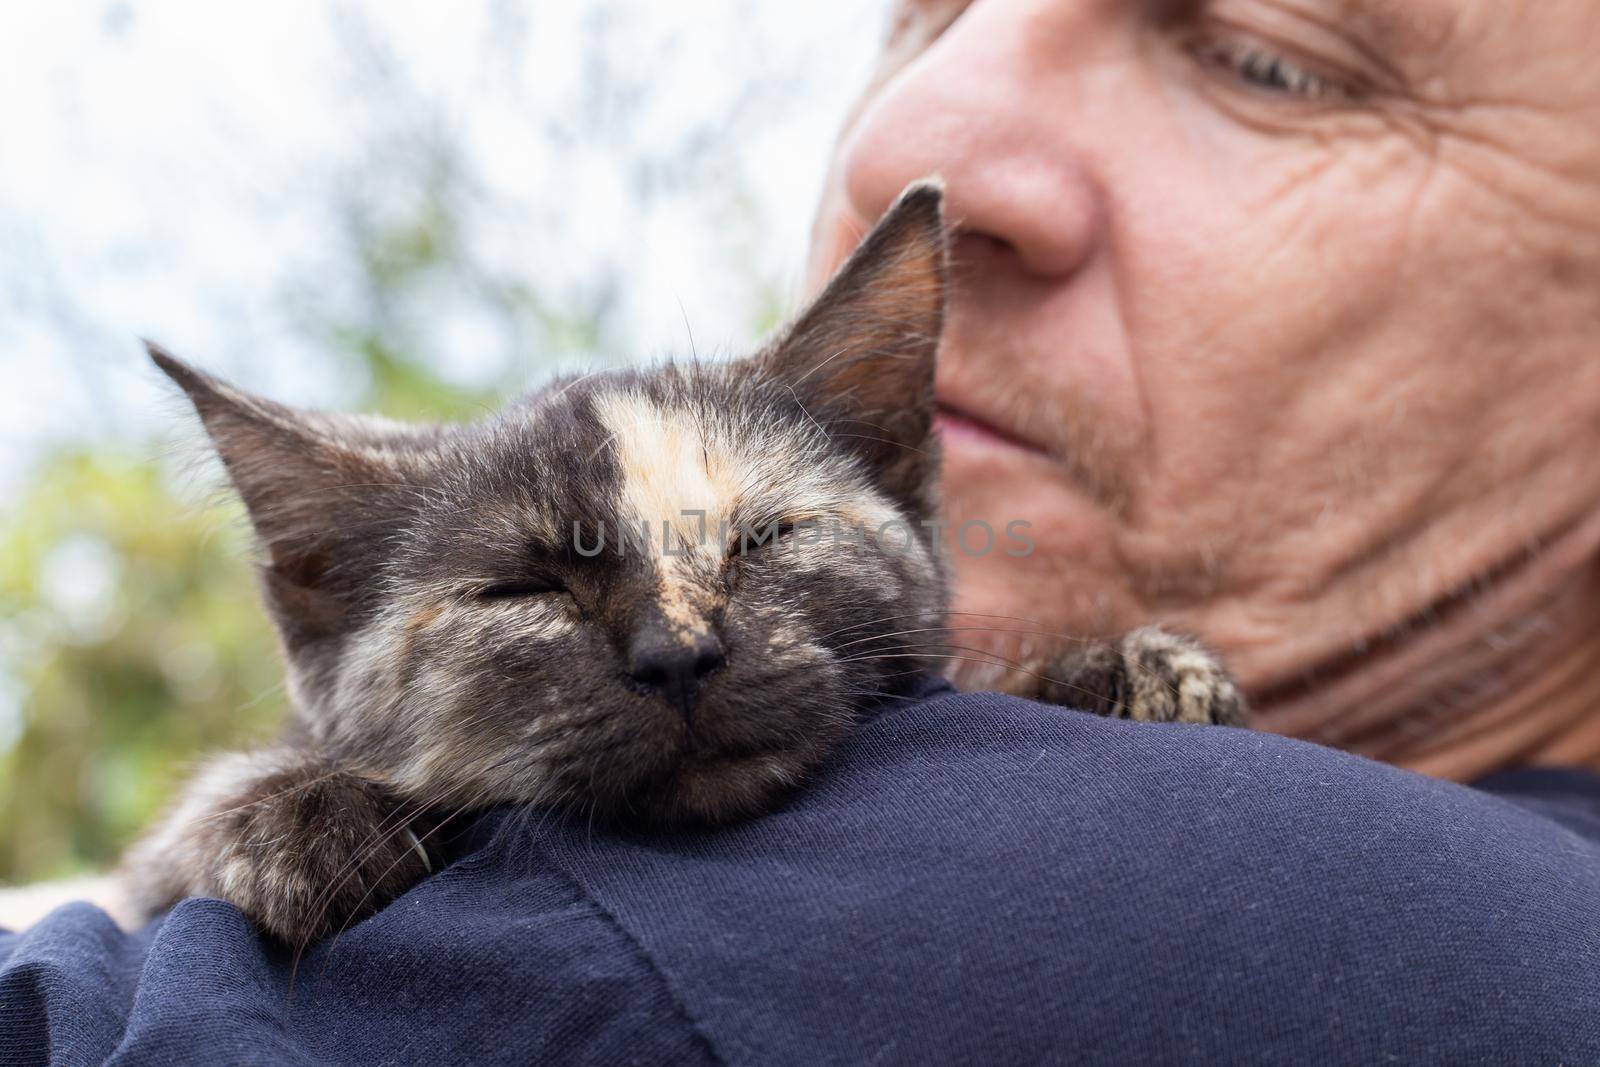 A kitten with a strip on its nose sleeps on the shoulder of an adult man. Love for pets by levnat09